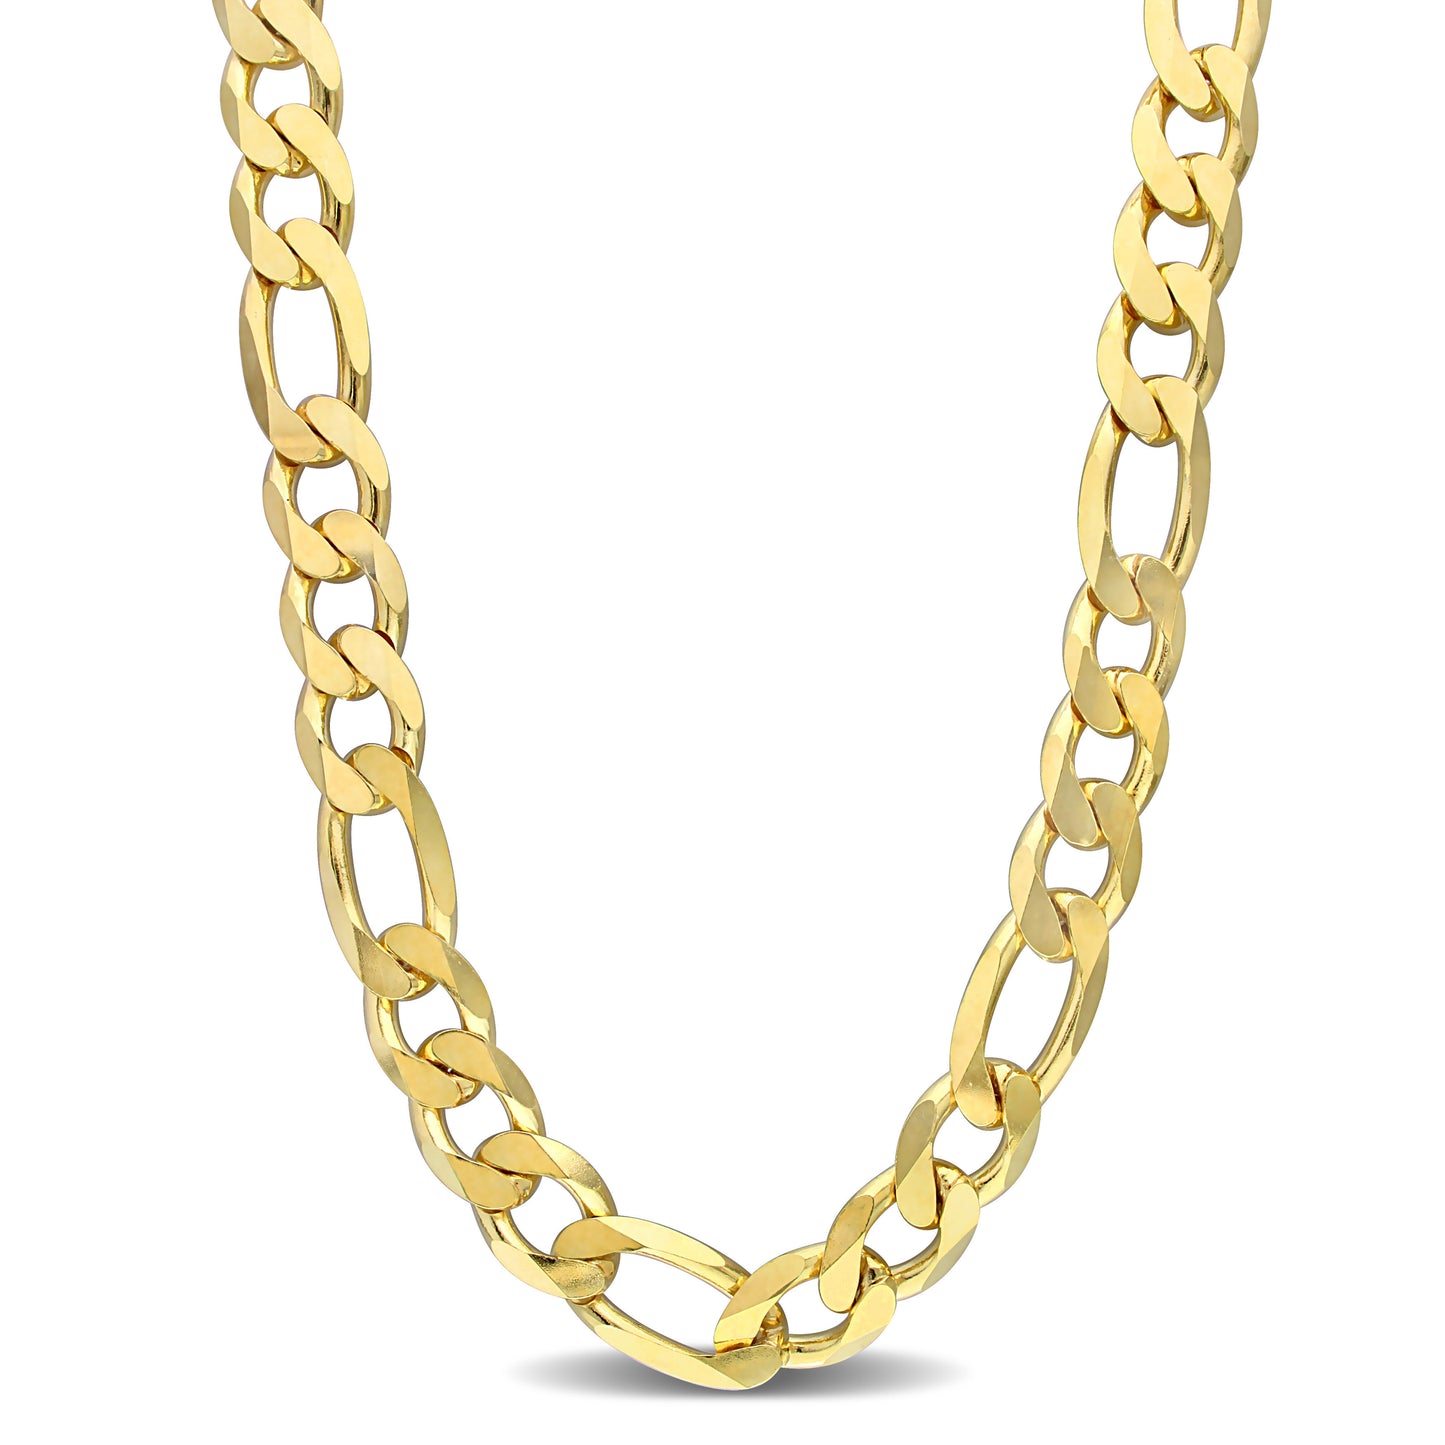 Figaro Chain in 15mm in Yellow Silver